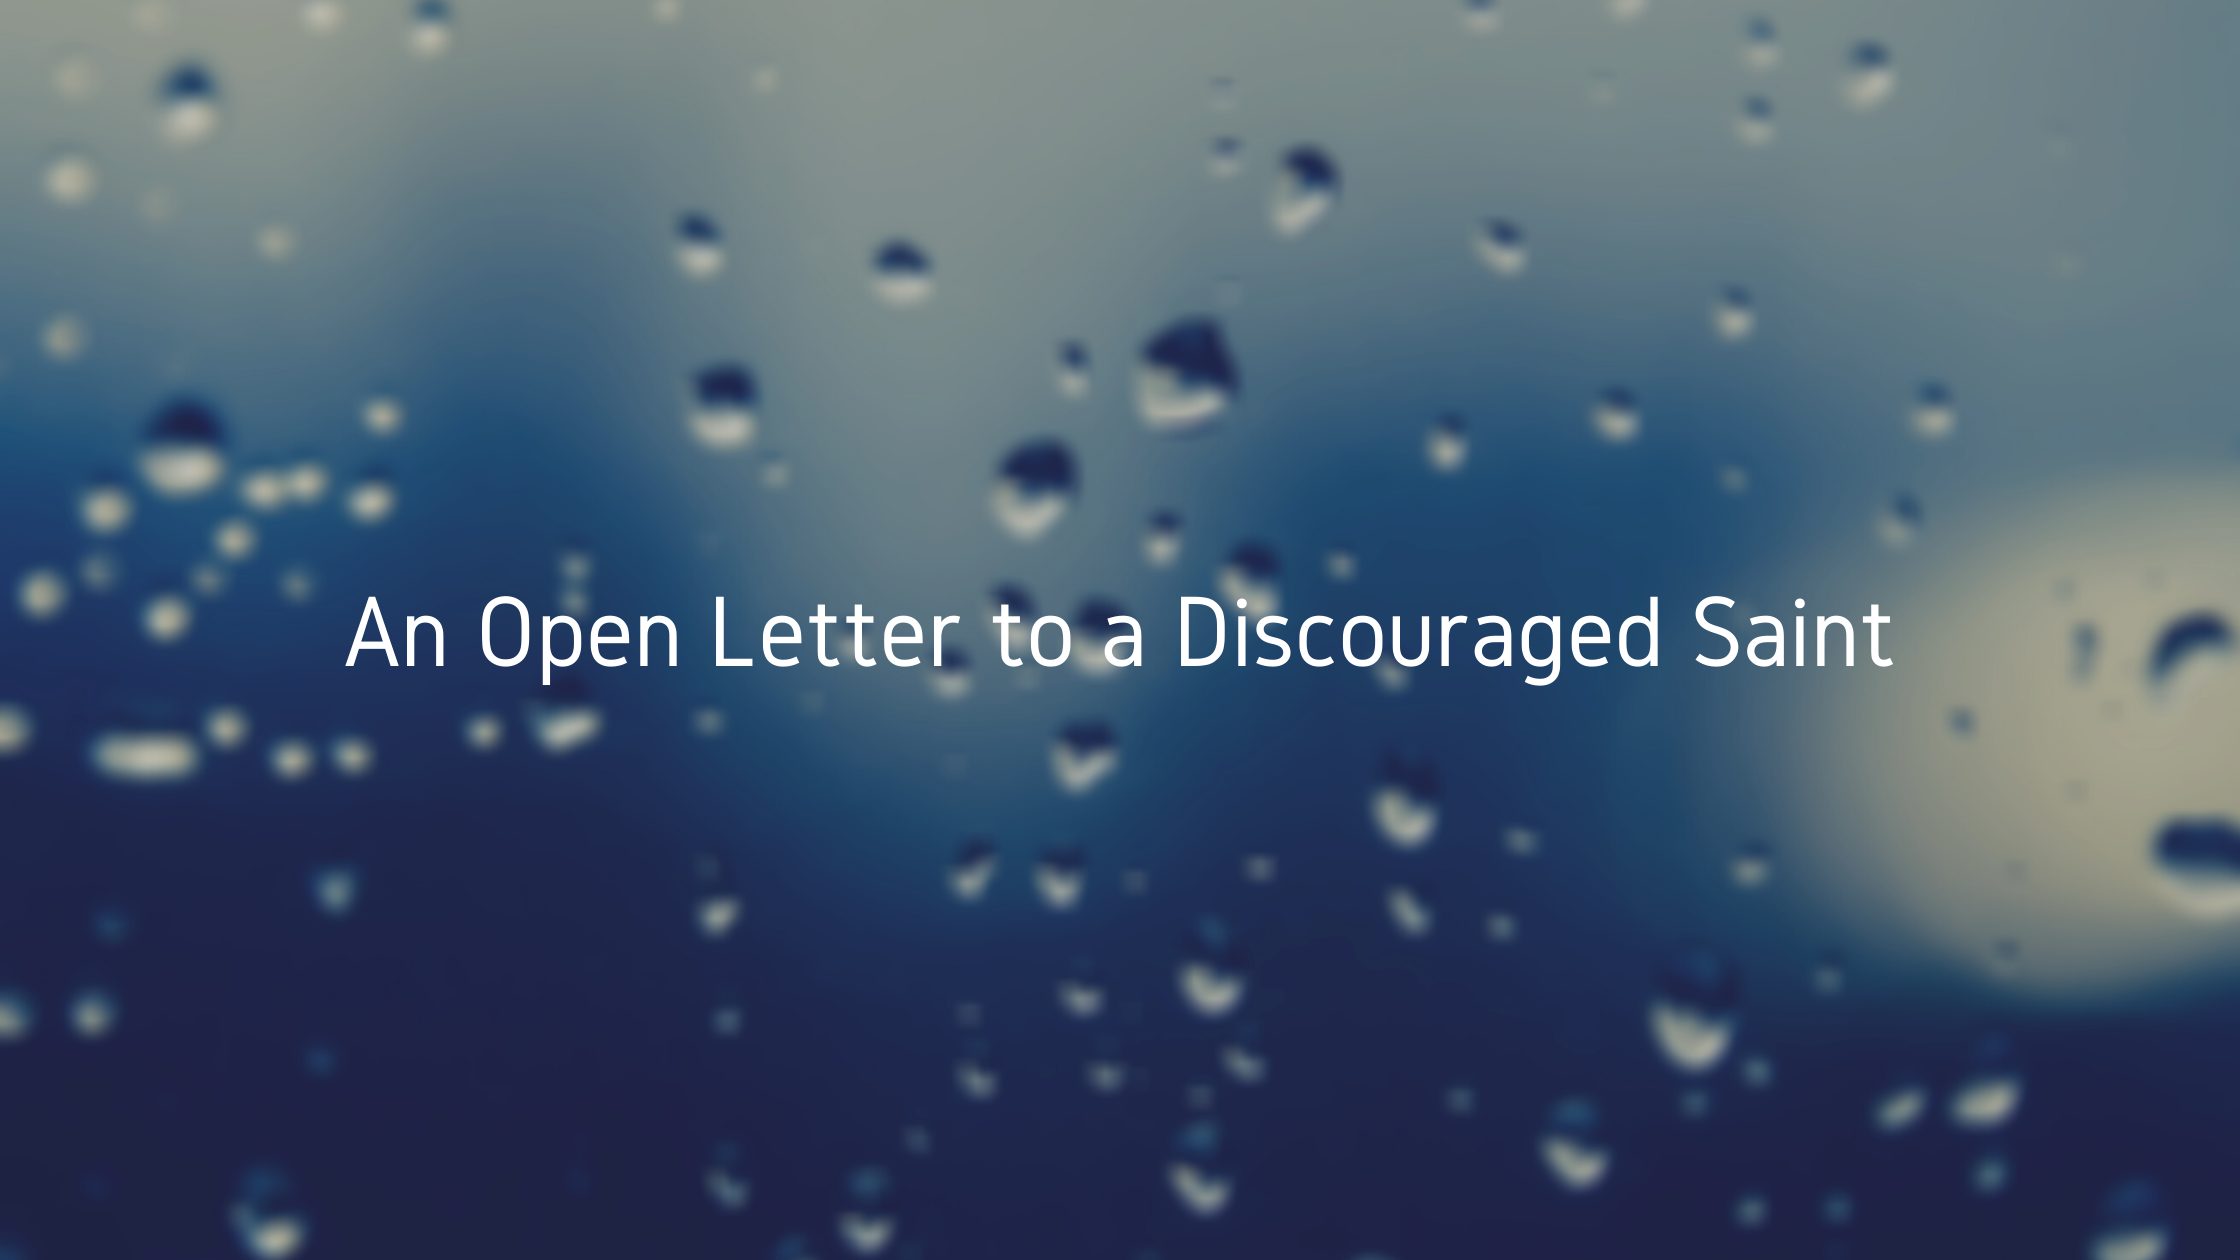 An Open Letter to a Discouraged Saint